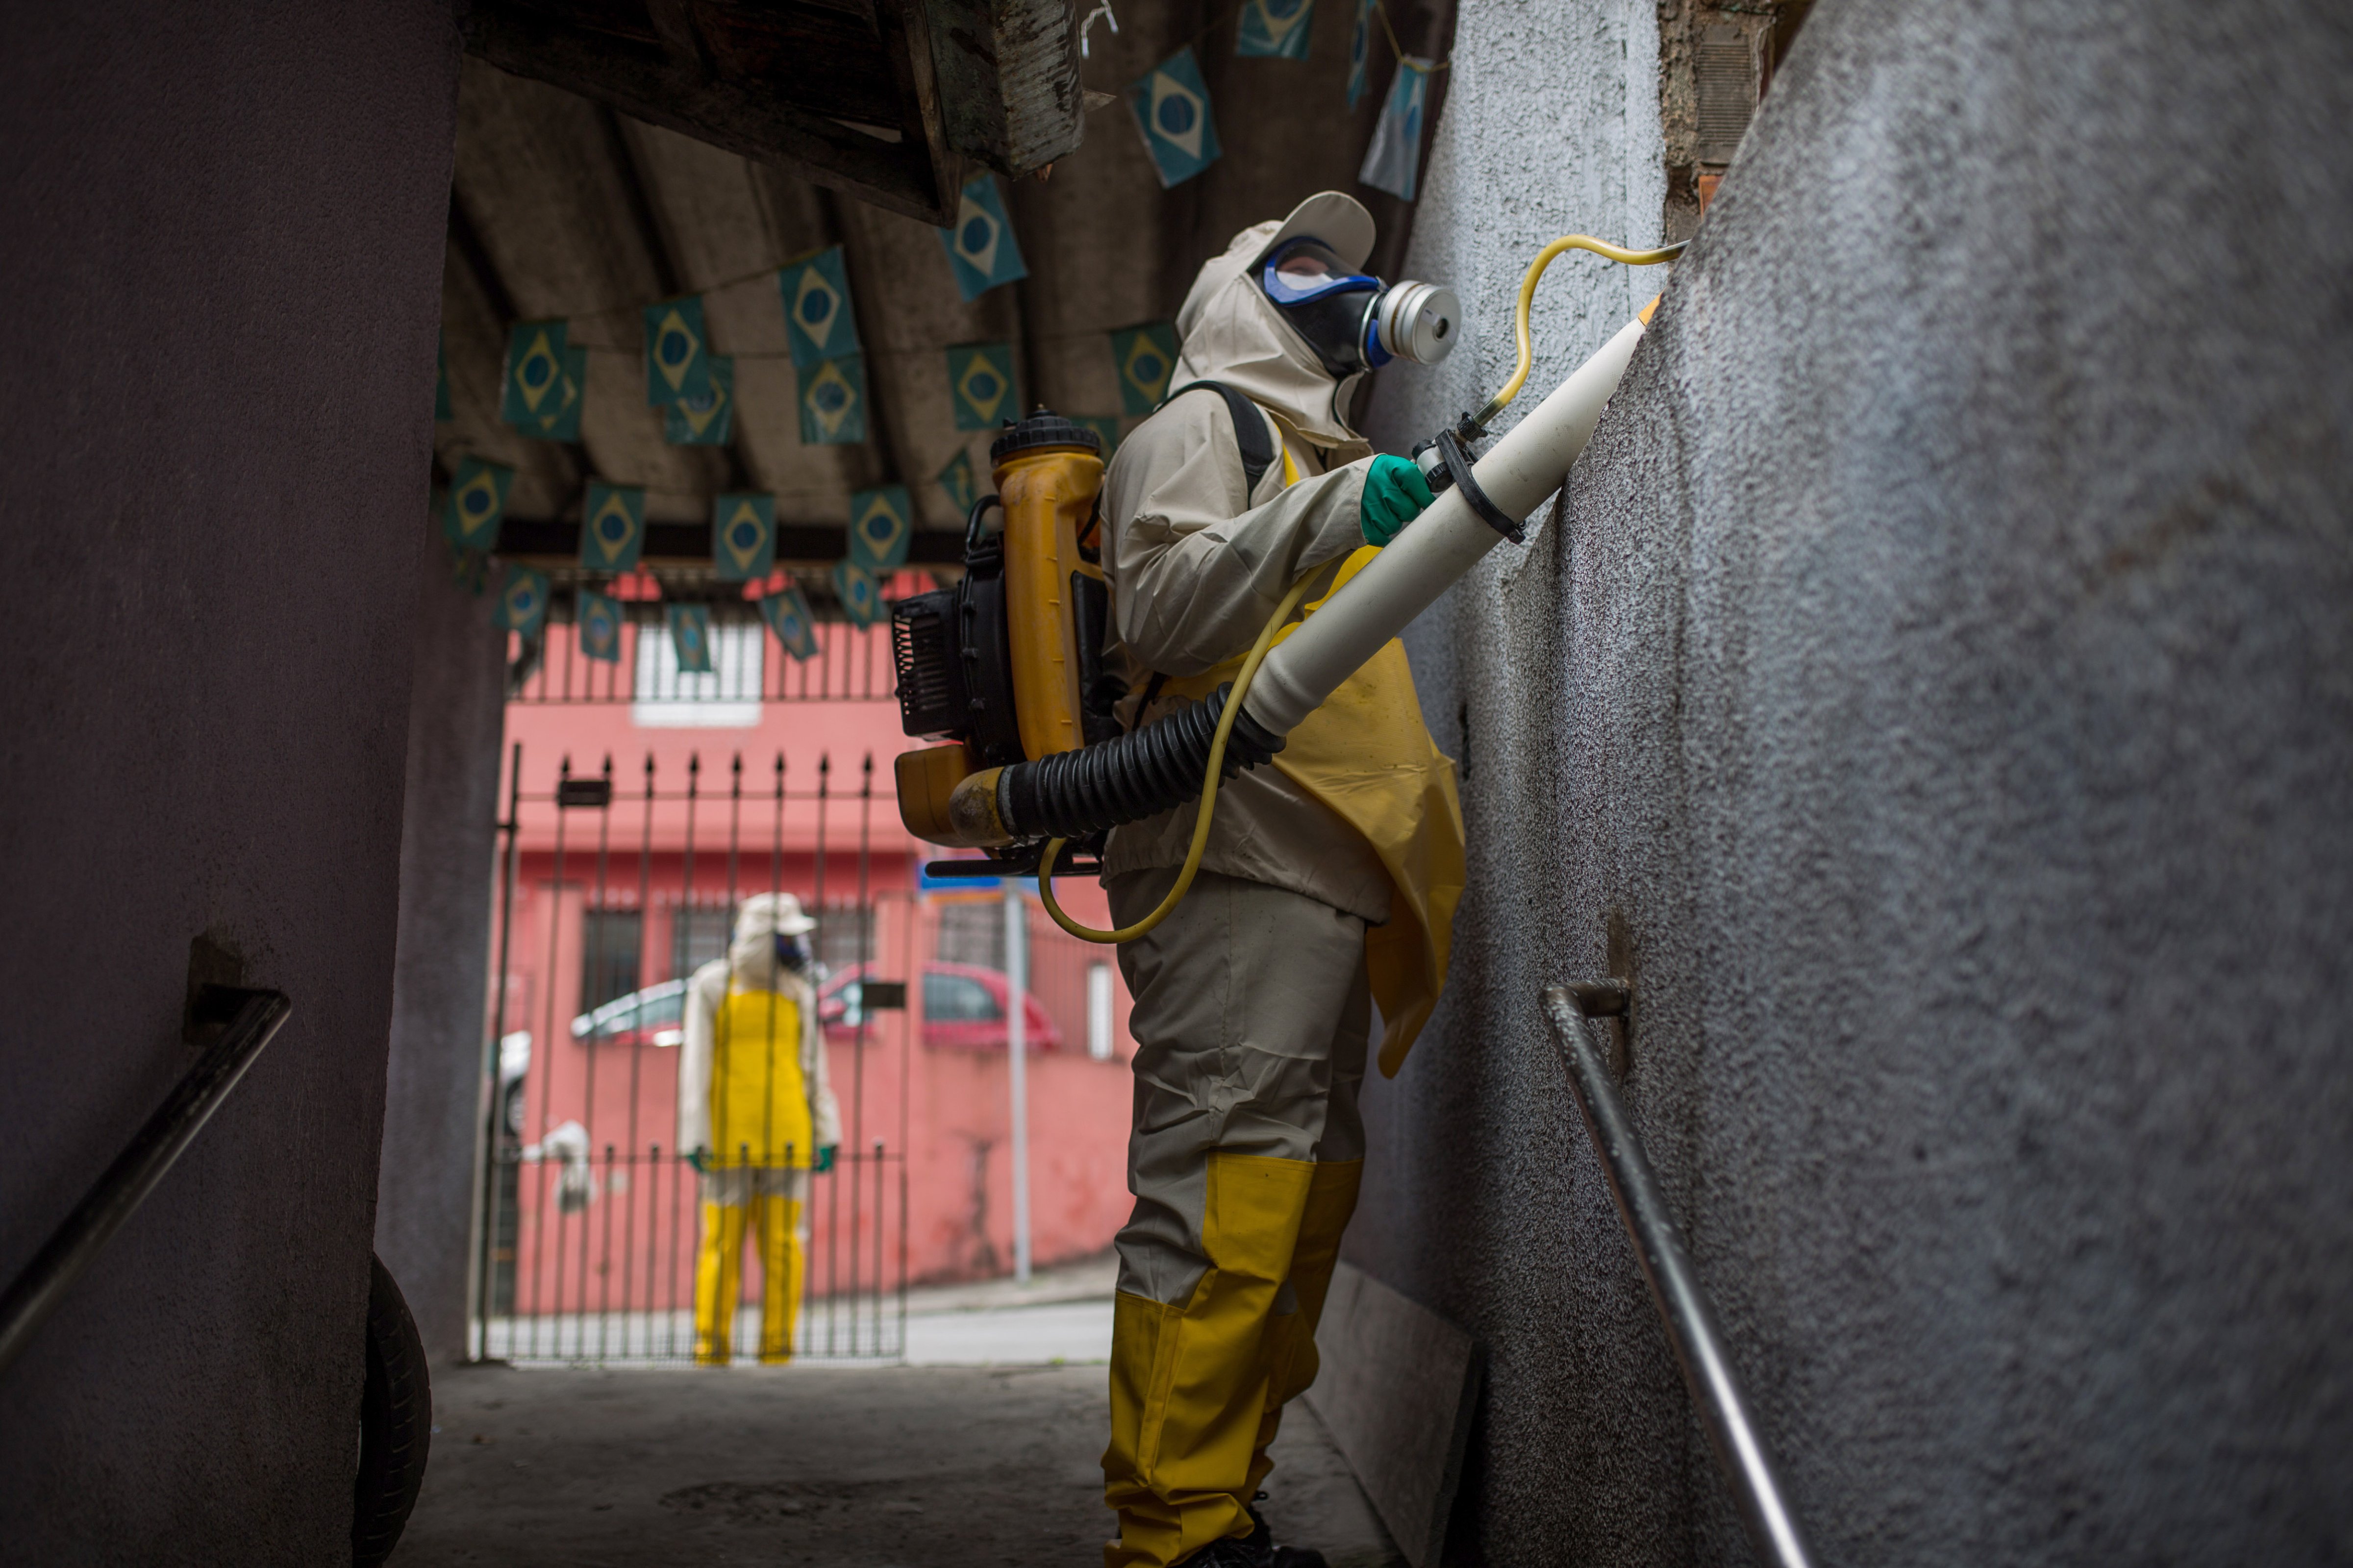 Agents working in pesticide fogging to combat mosquito larvae after the outbreak of the Zika virus on Jan. 29 in Sao Paulo, Brazil. (Victor Moriyama—Getty Images)